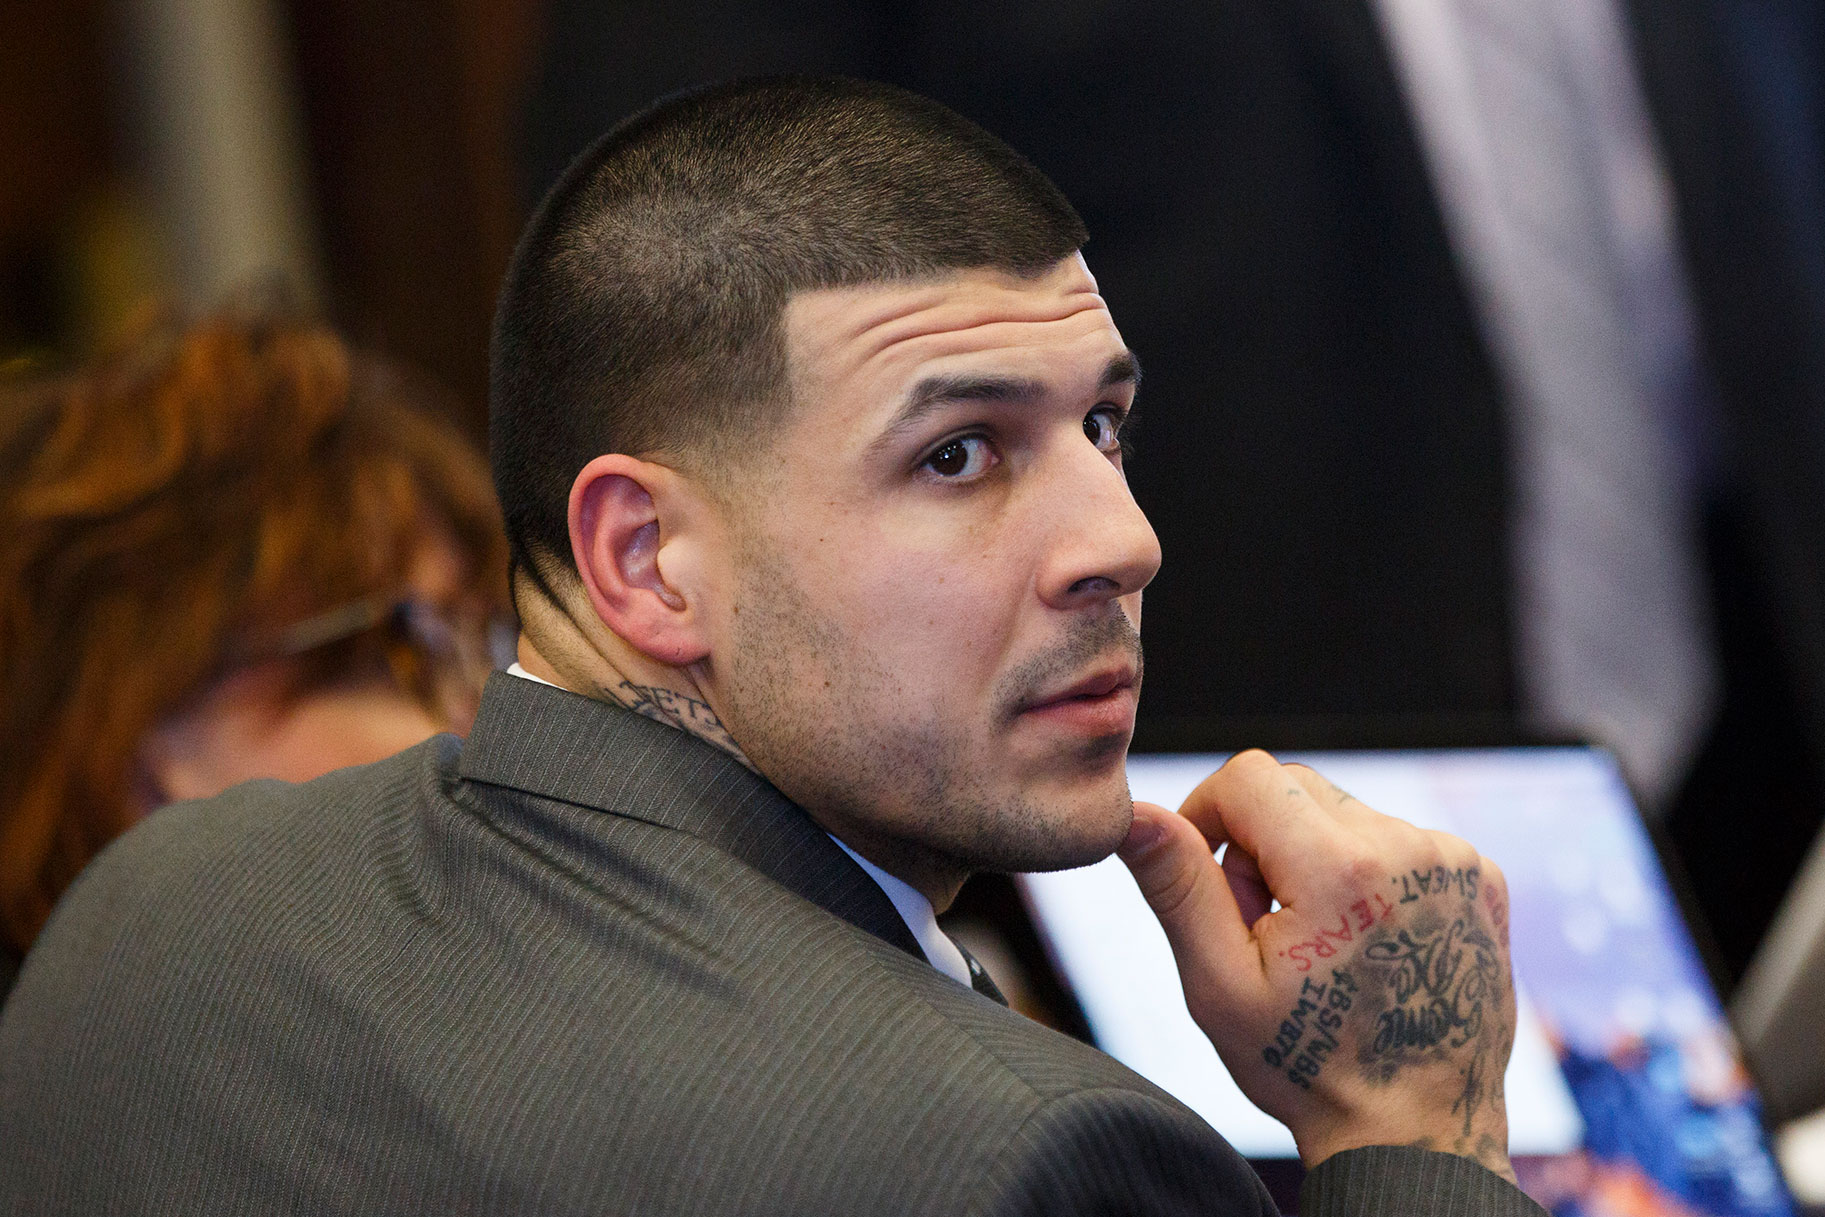 Aaron Hernandez's tattoos: Why prosecutors suspect they could be evidence  of murder – The Mercury News